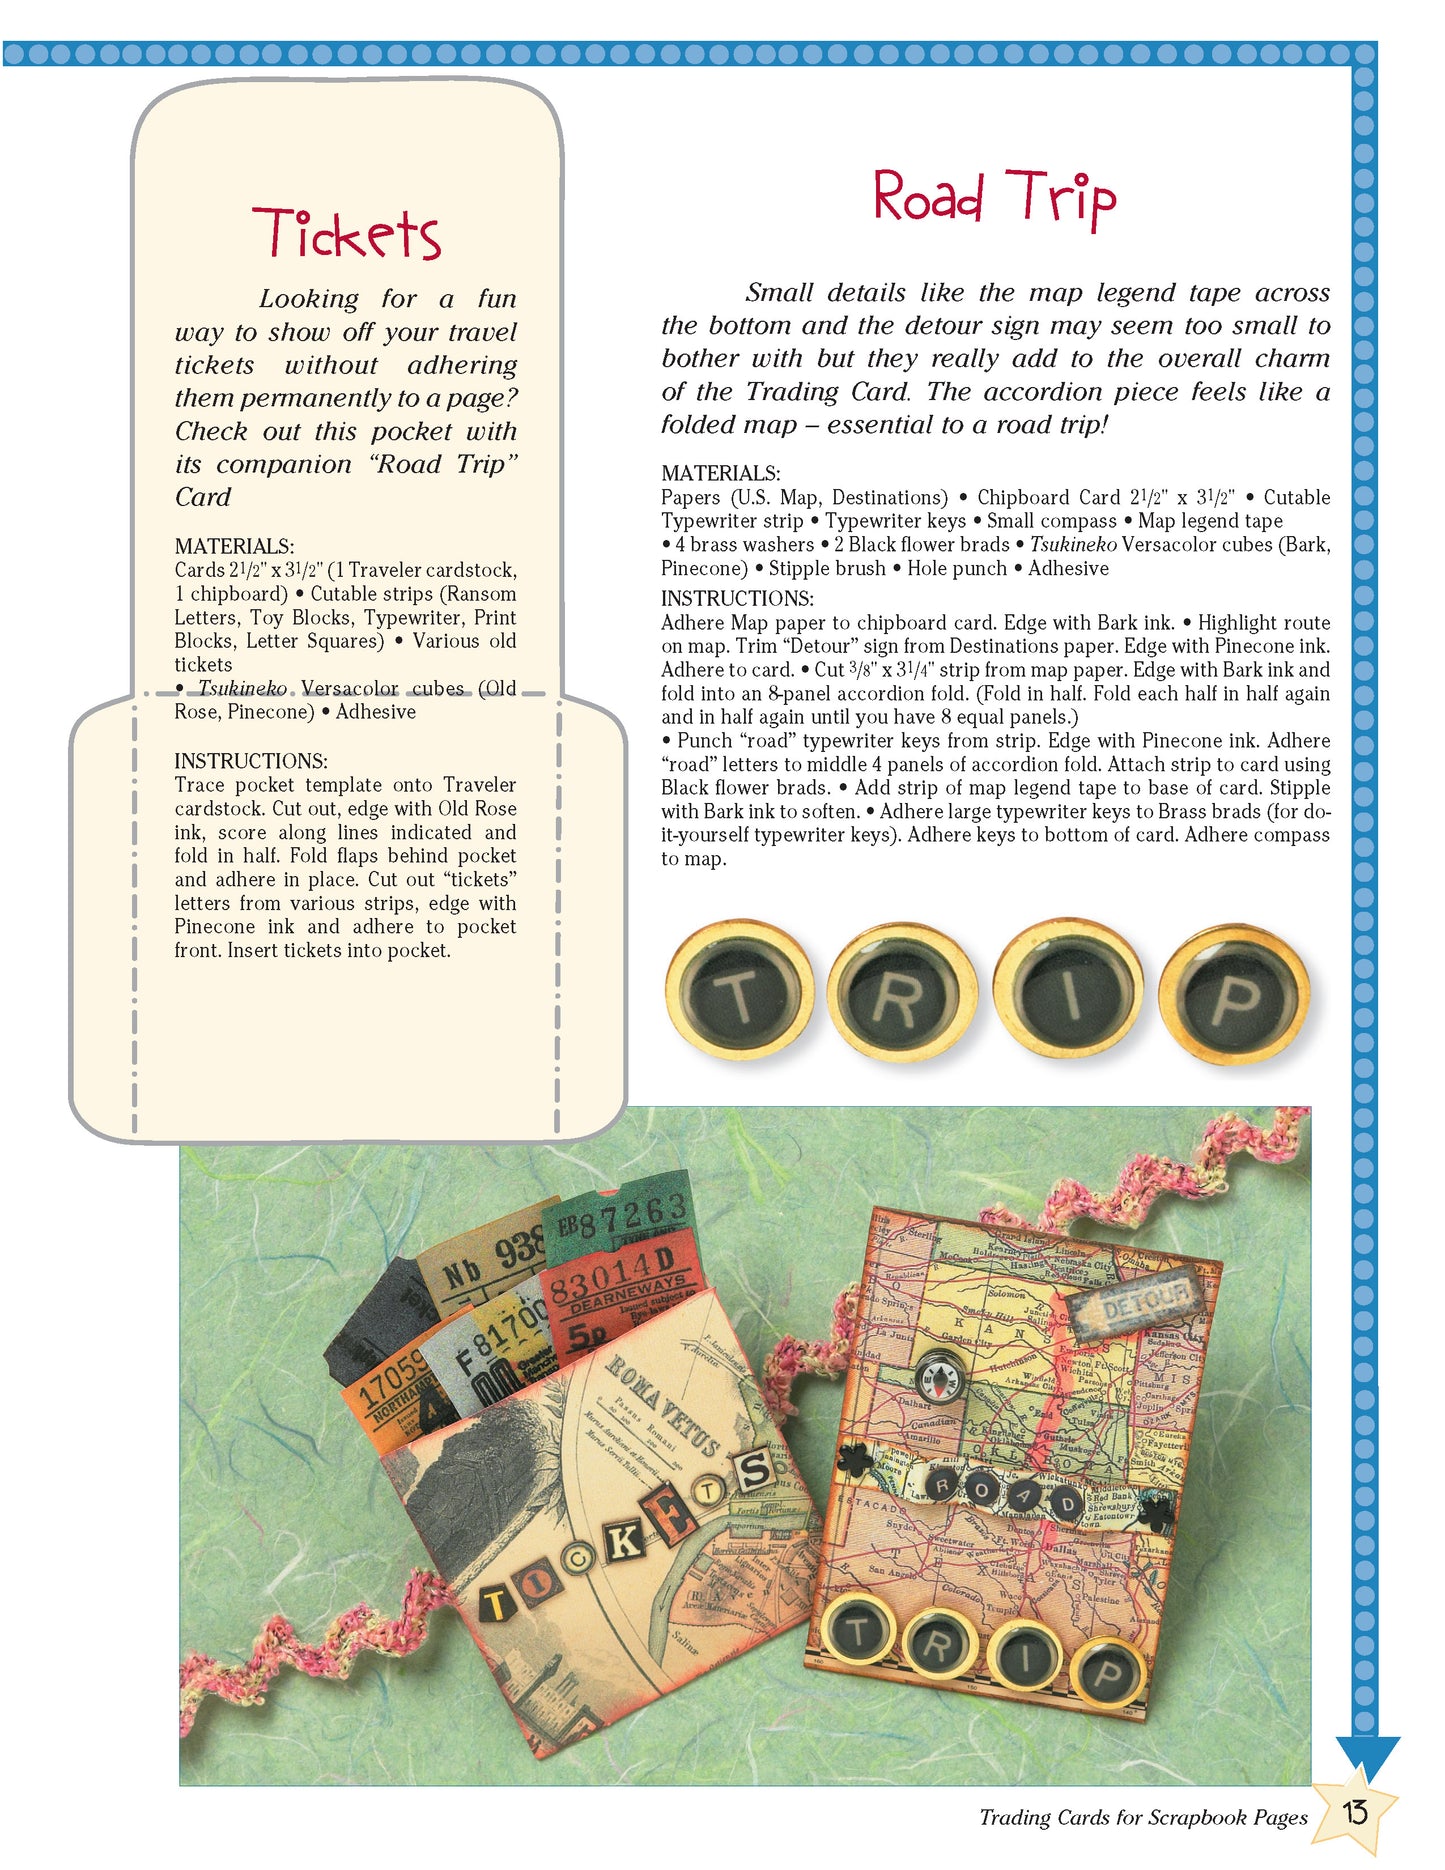 Trading Cards for Scrapbook Pages